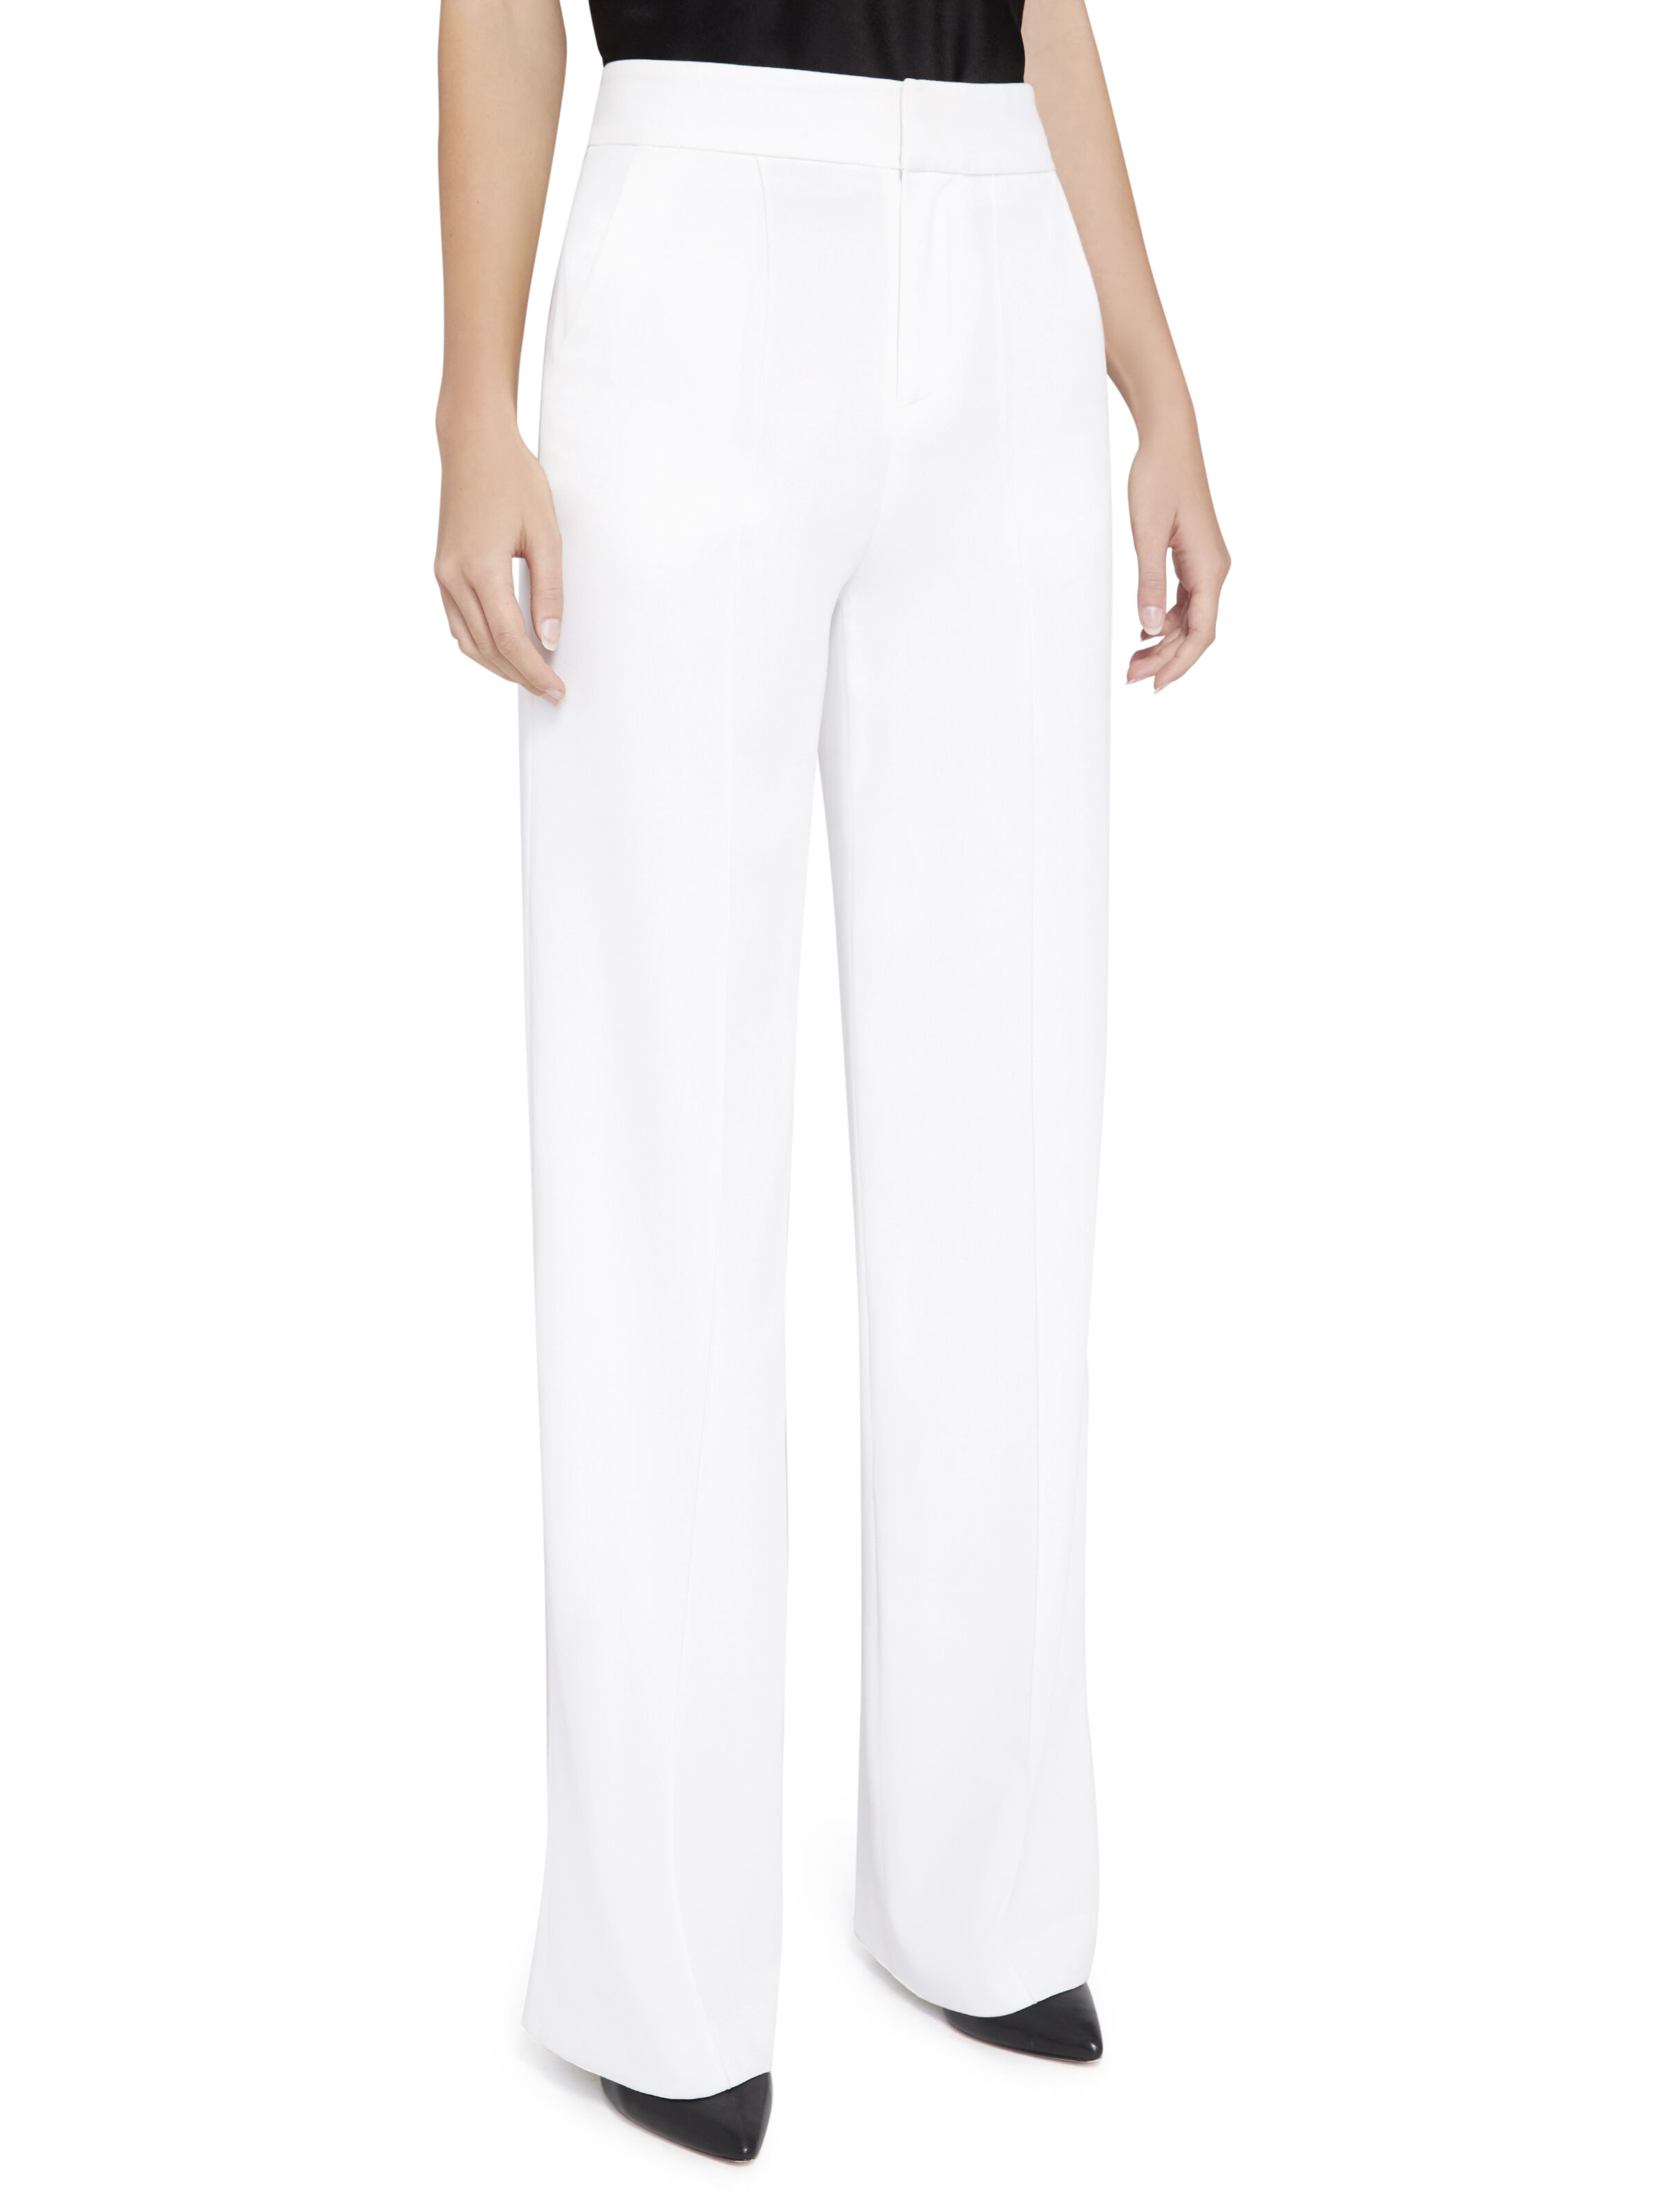 DYLAN HIGH WAISTED WIDE LEG PANT